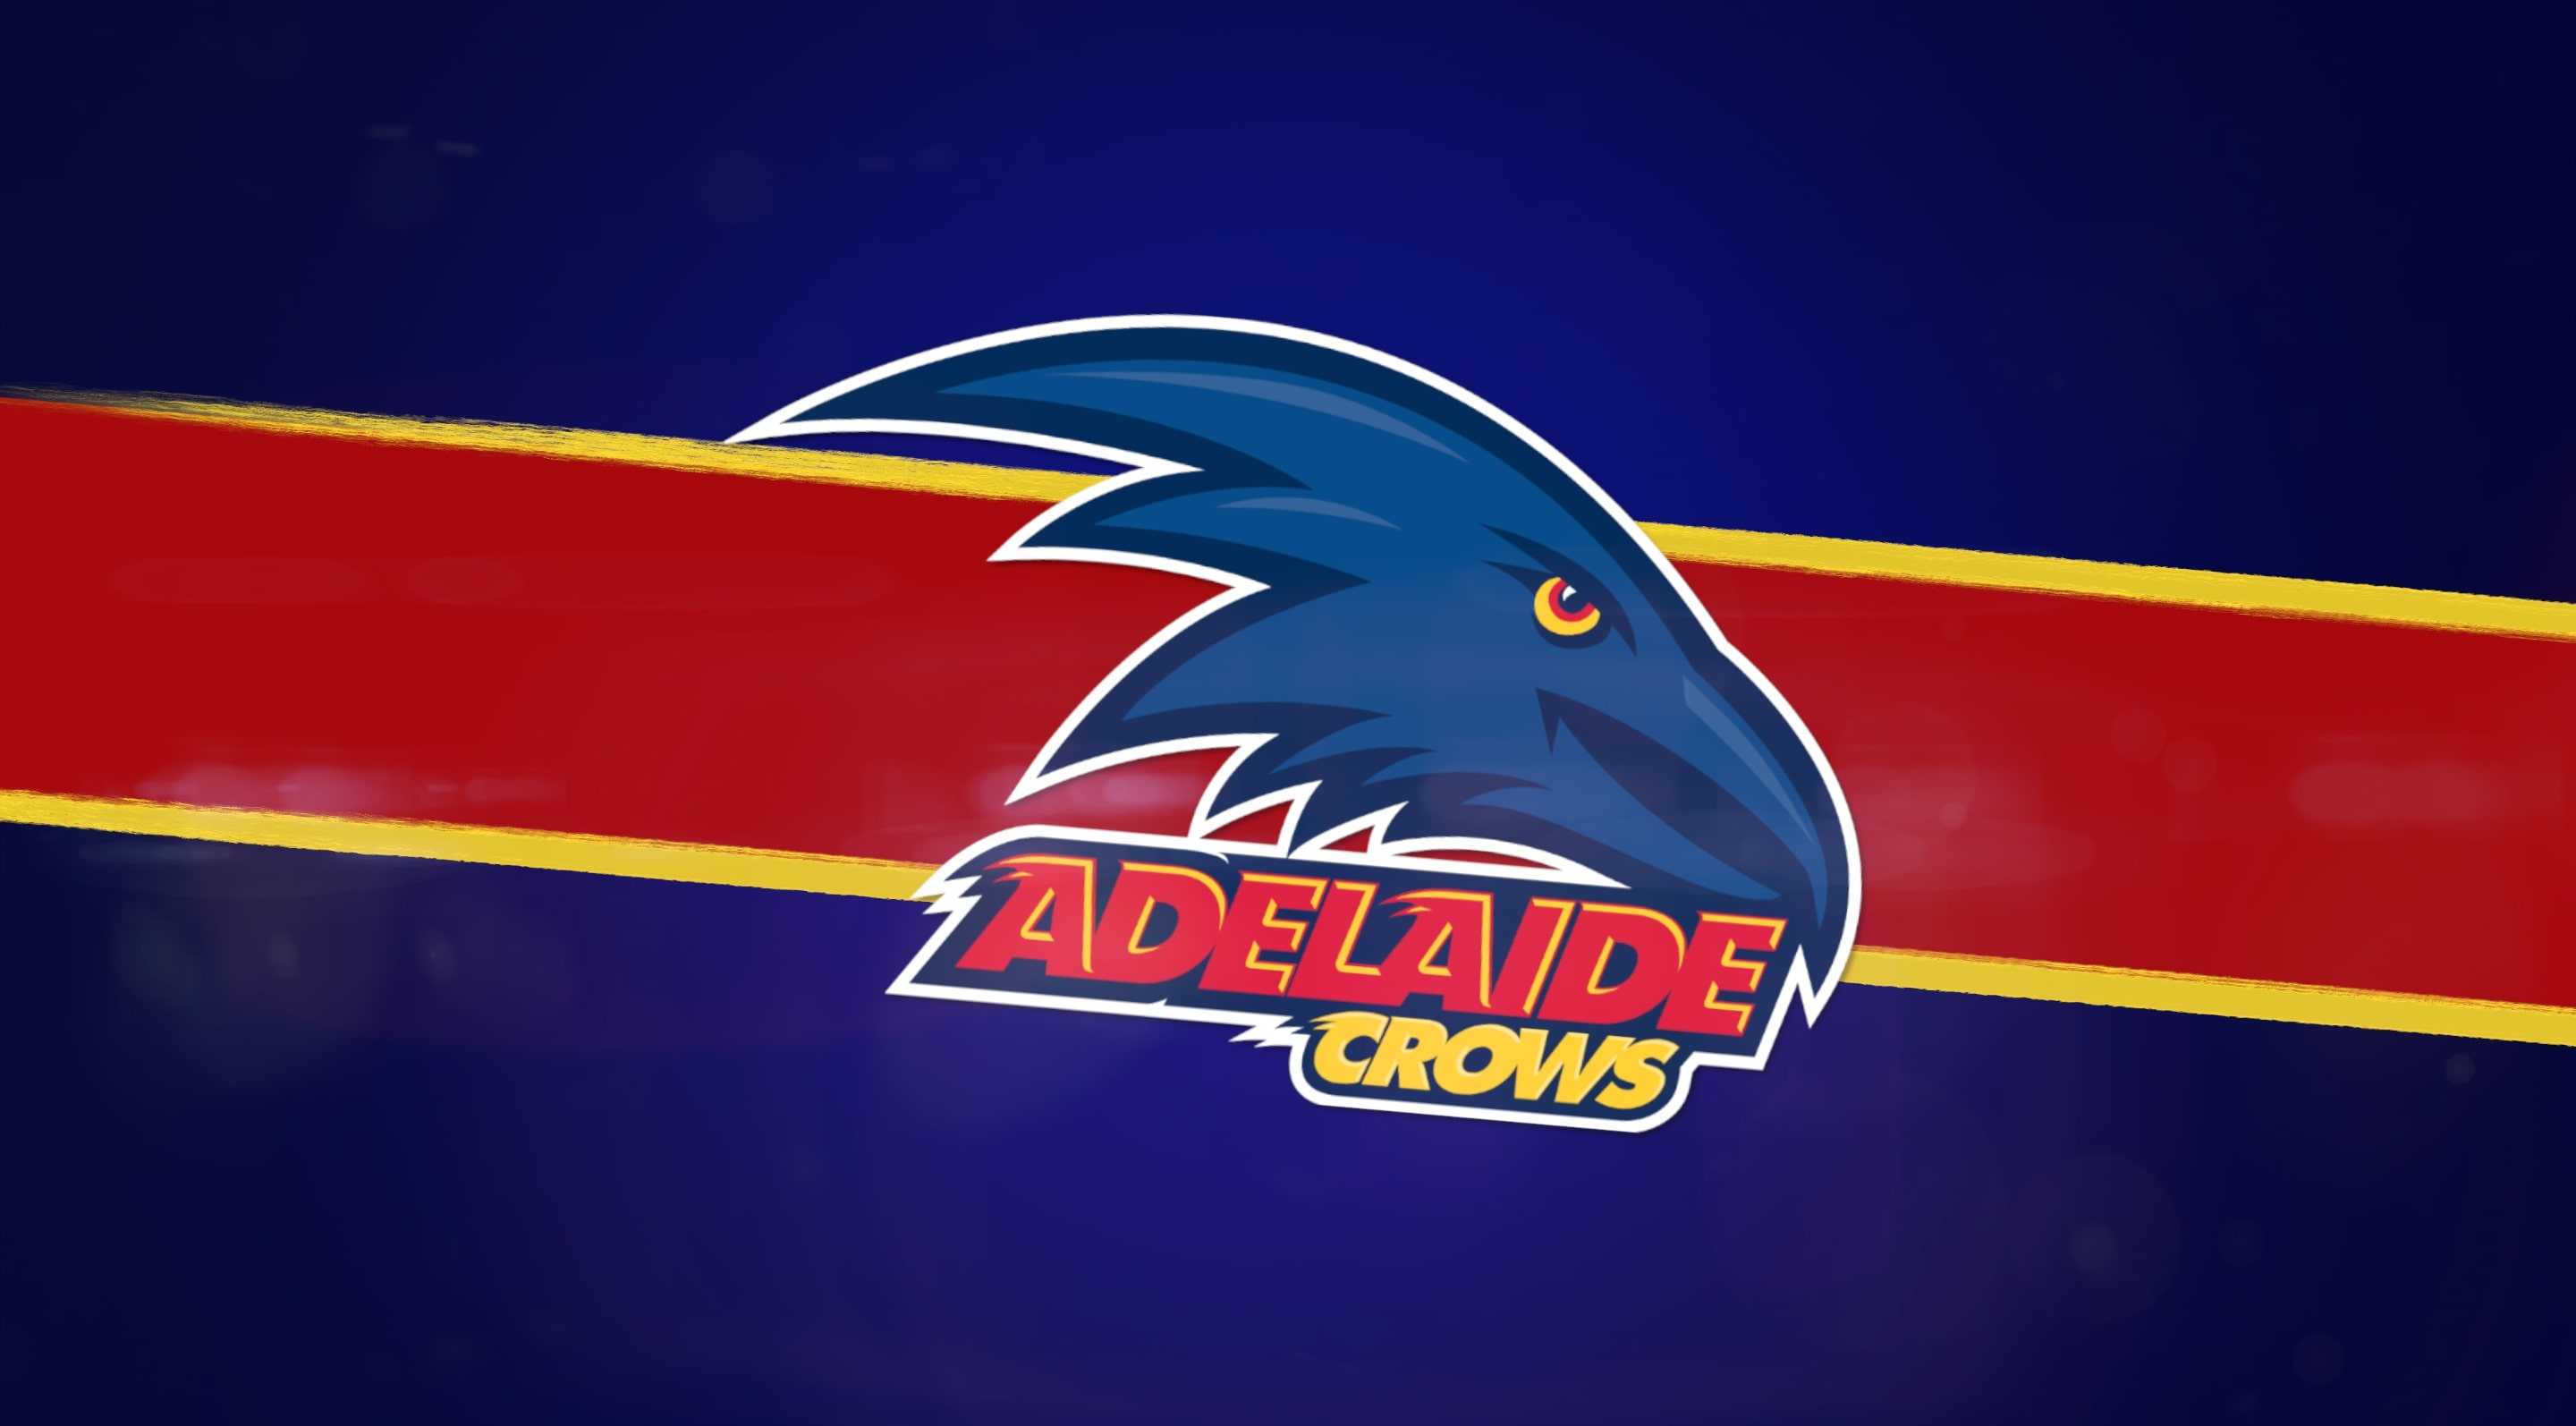 Adelaide Crows Wallpapers 1